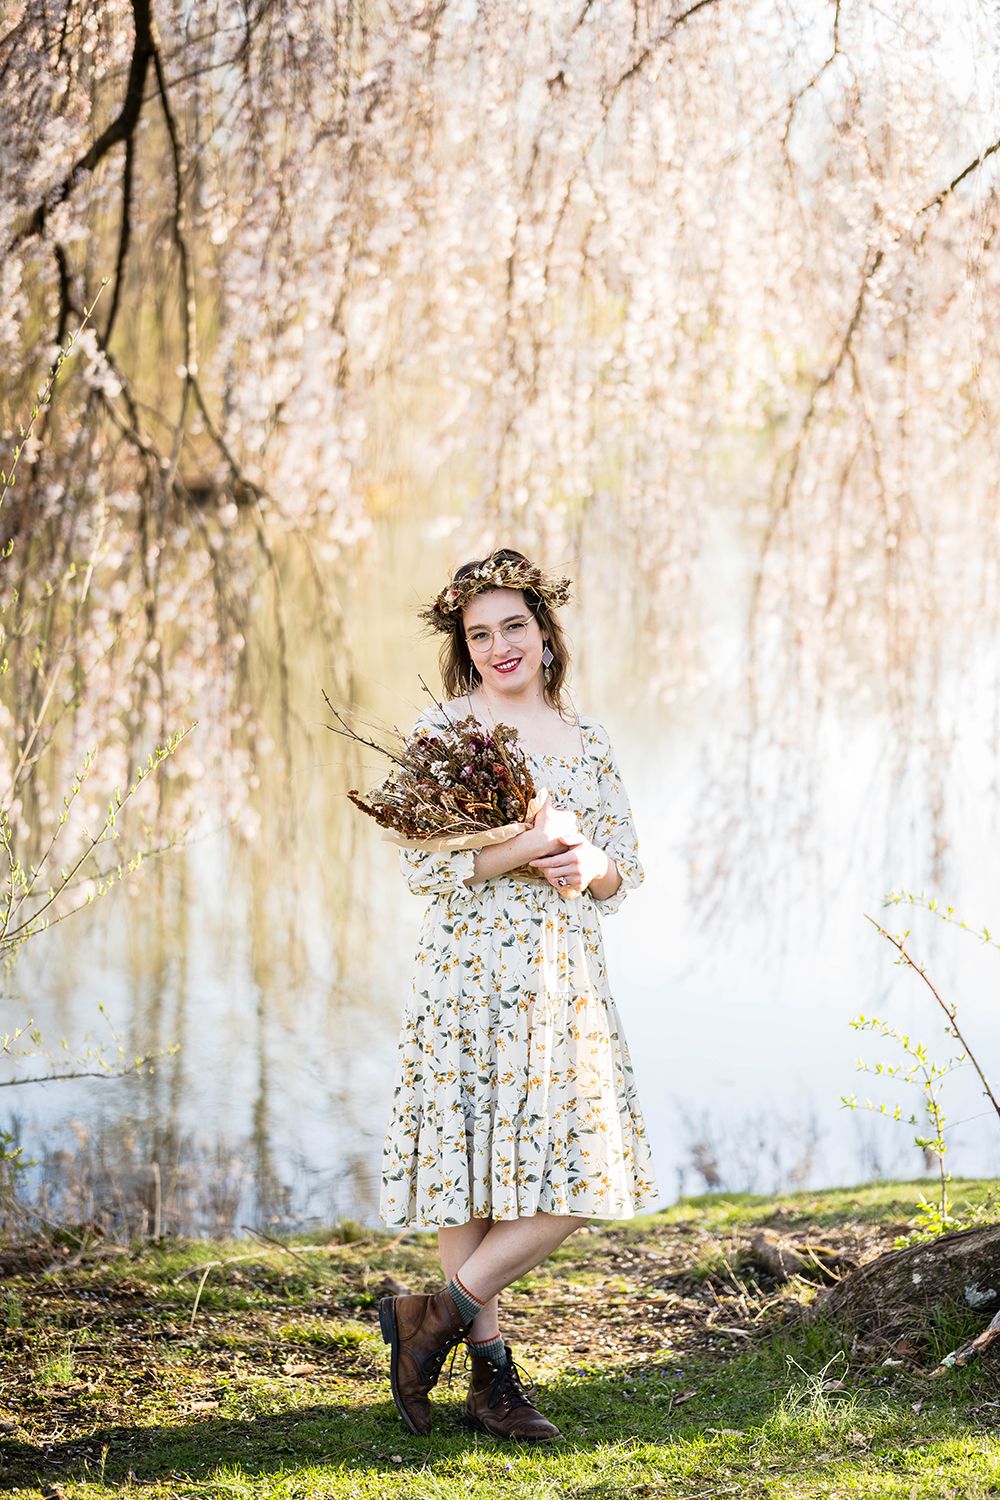 A transwoman wearing a dried flower crown holds a dried flower bouquet as she poses for a photo in front of a willow tree.